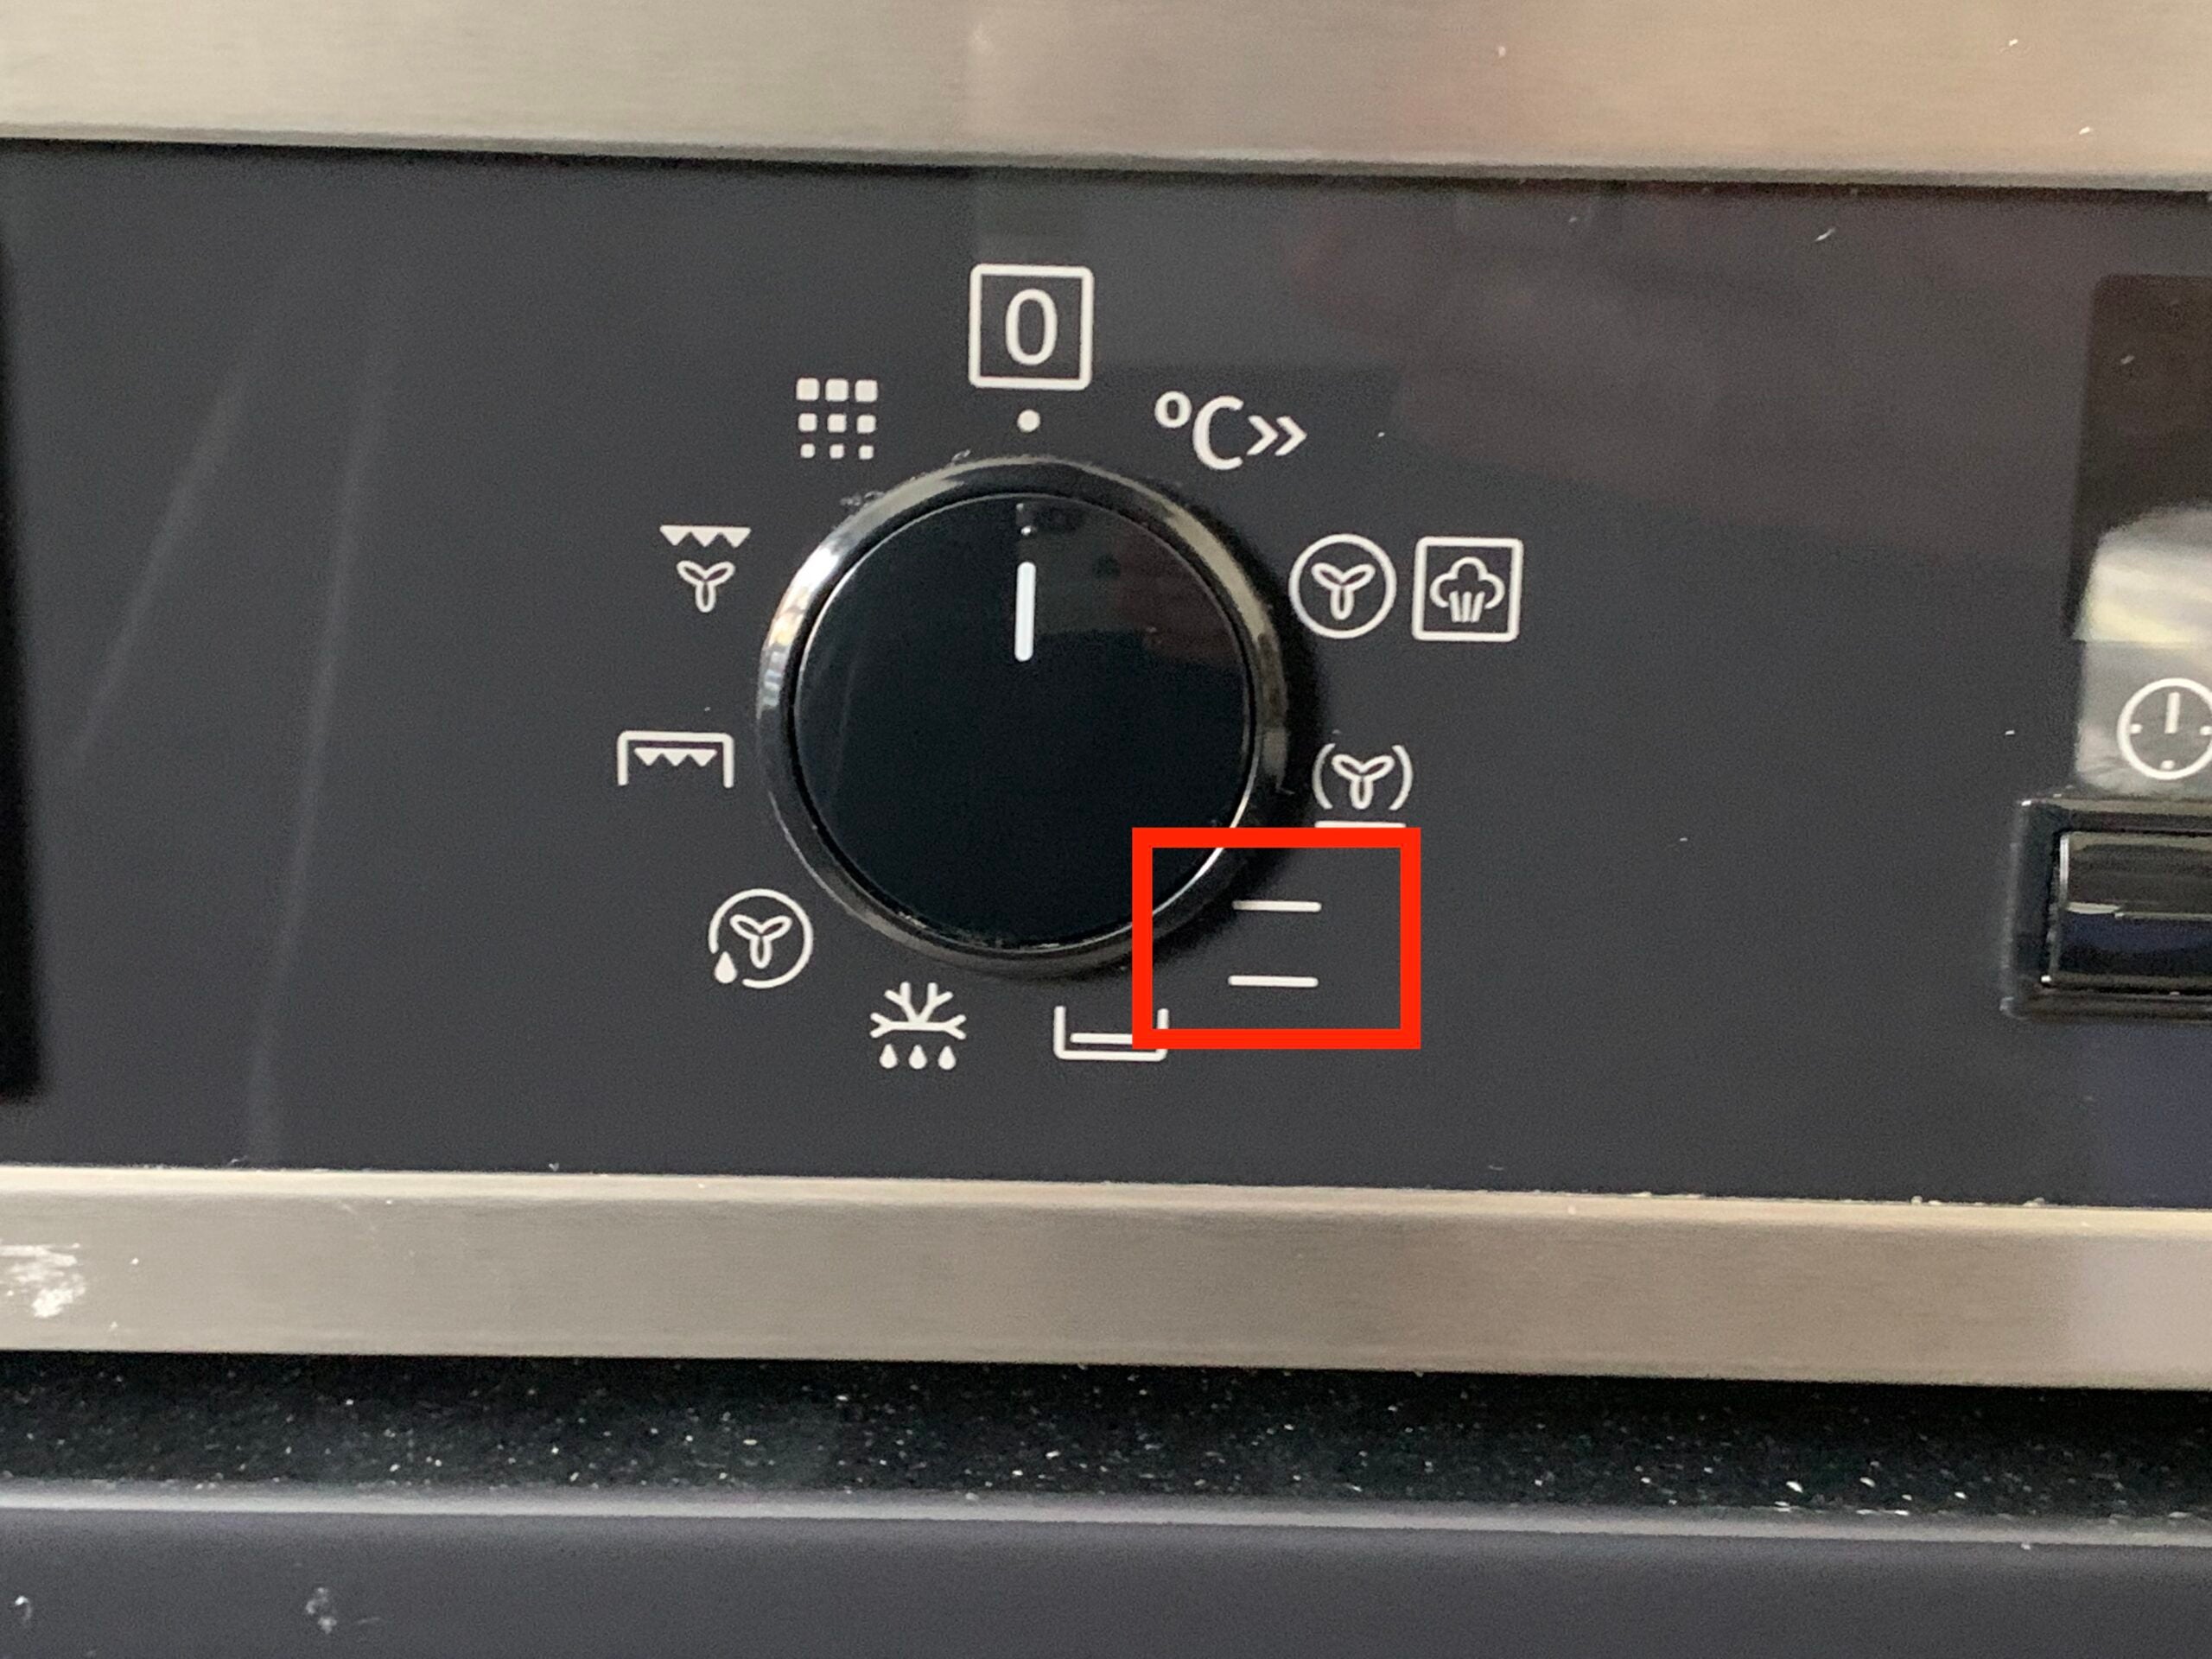 The top and bottom heat setting on an oven